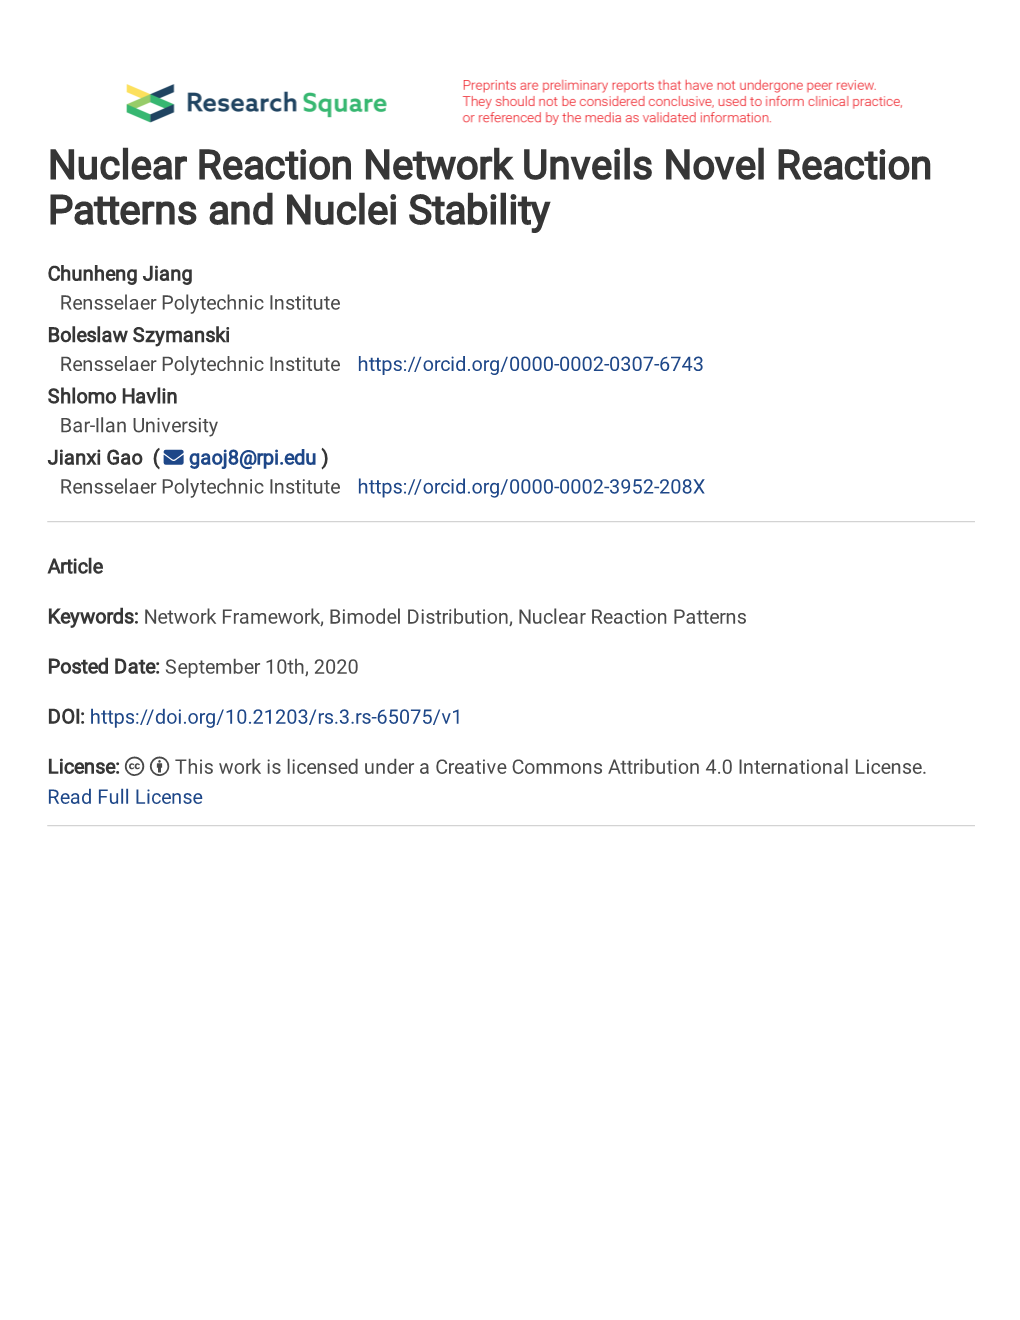 Nuclear Reaction Network Unveils Novel Reaction Patterns and Nuclei Stability